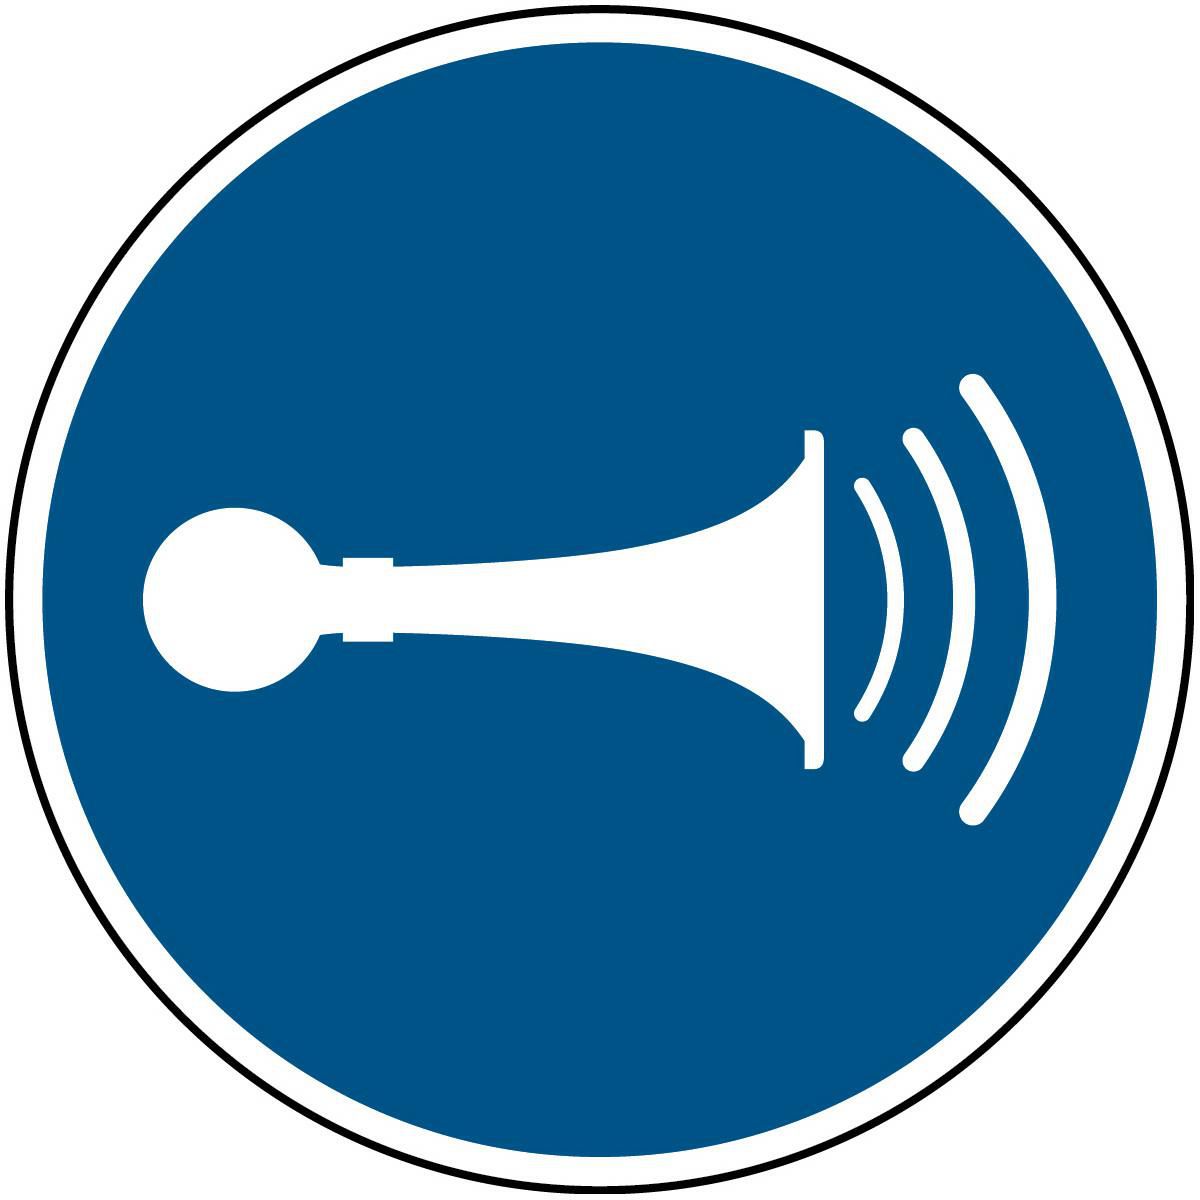 Brady PIC M029-DIA 100-AL-CRD1 W128403802 ISO Safety Sign - Sound horn 